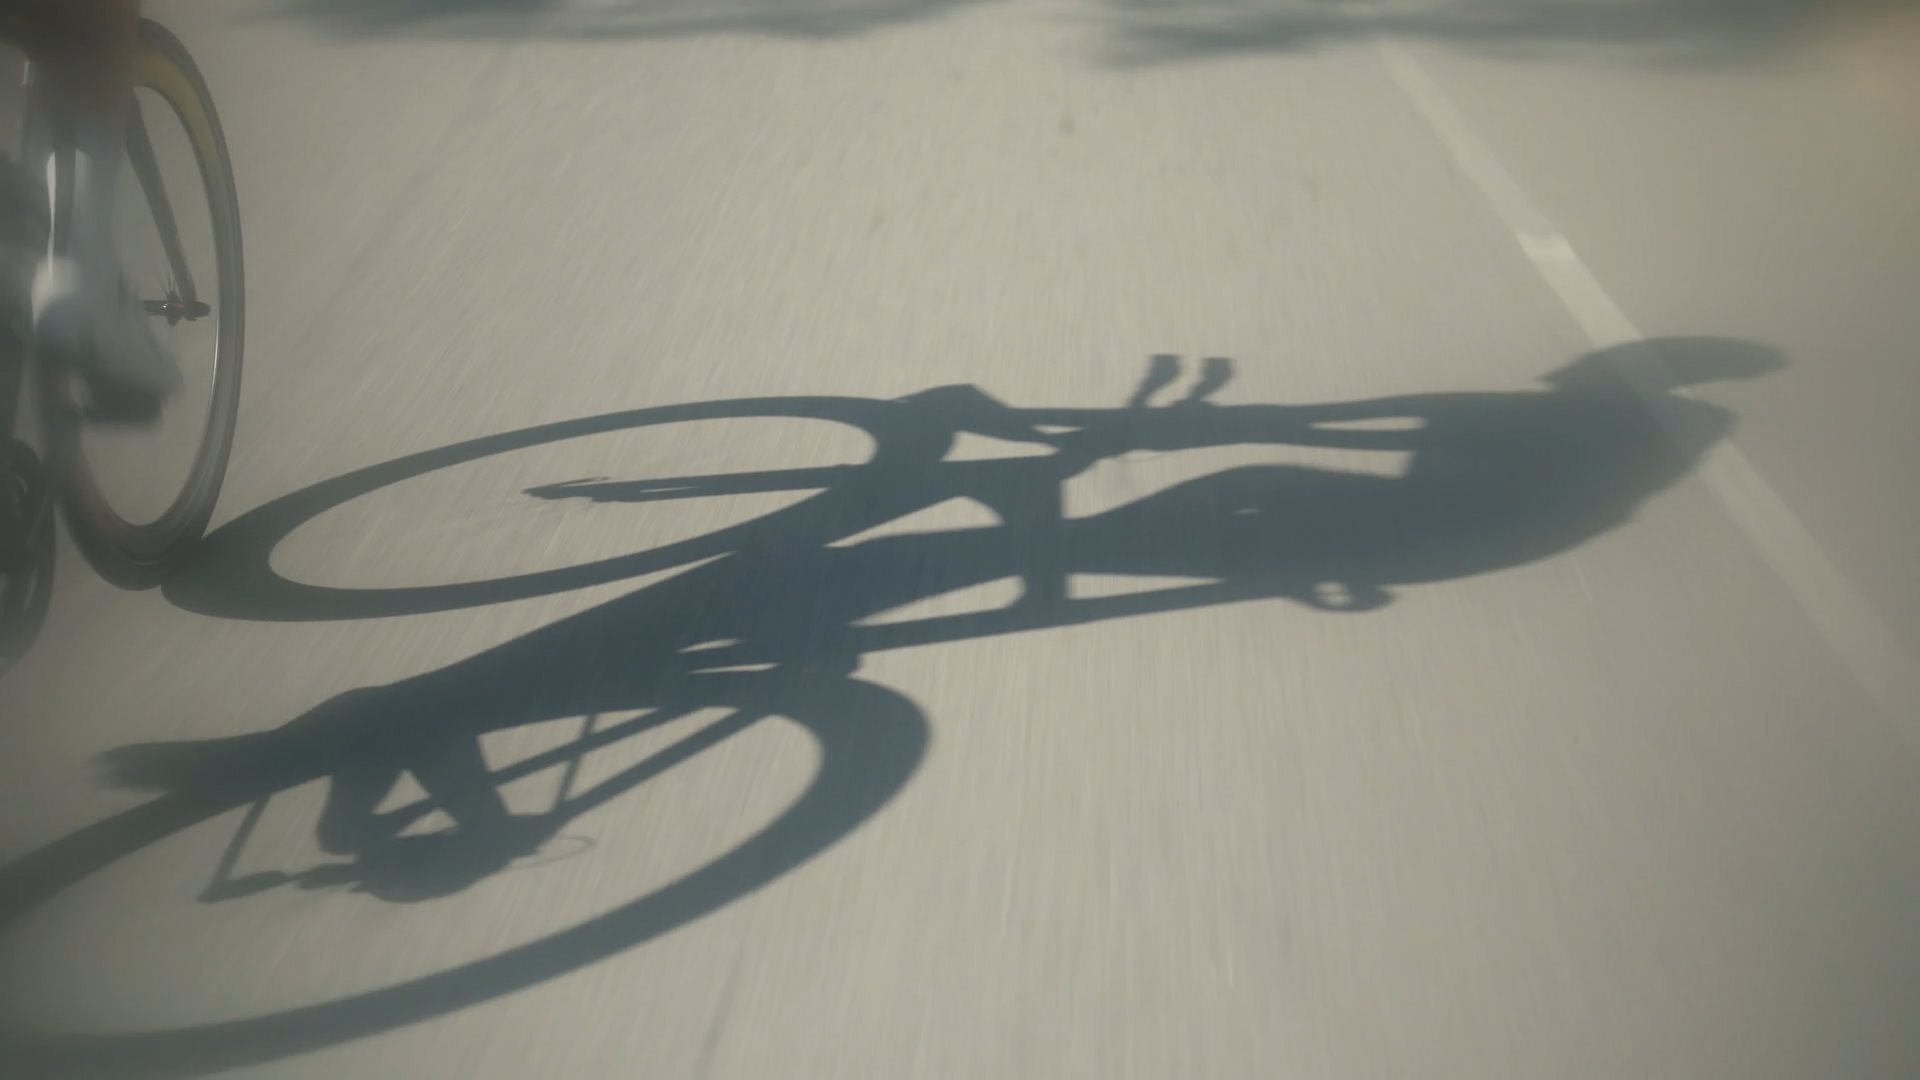 Video of moving cycler's shadow